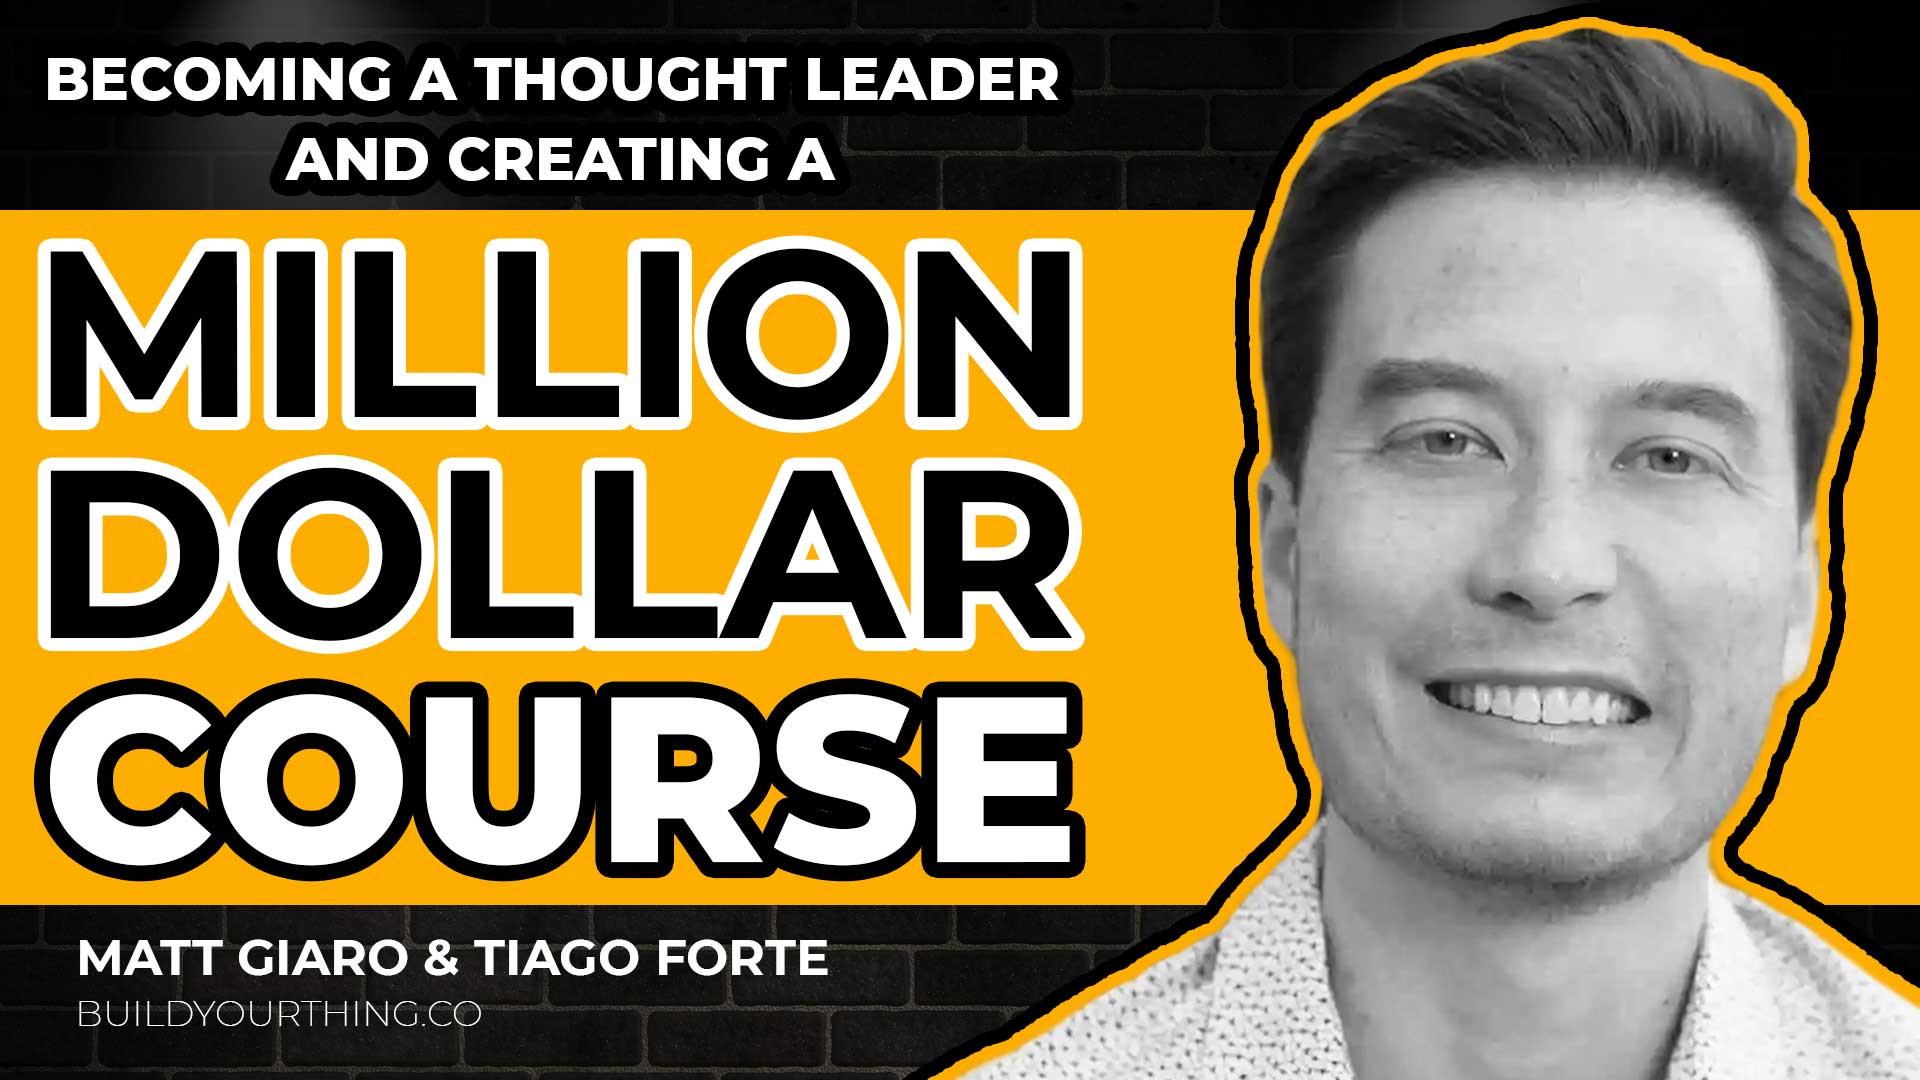 Becoming a Thought Leader and Creating a Million Dollar Course With Tiago Forte